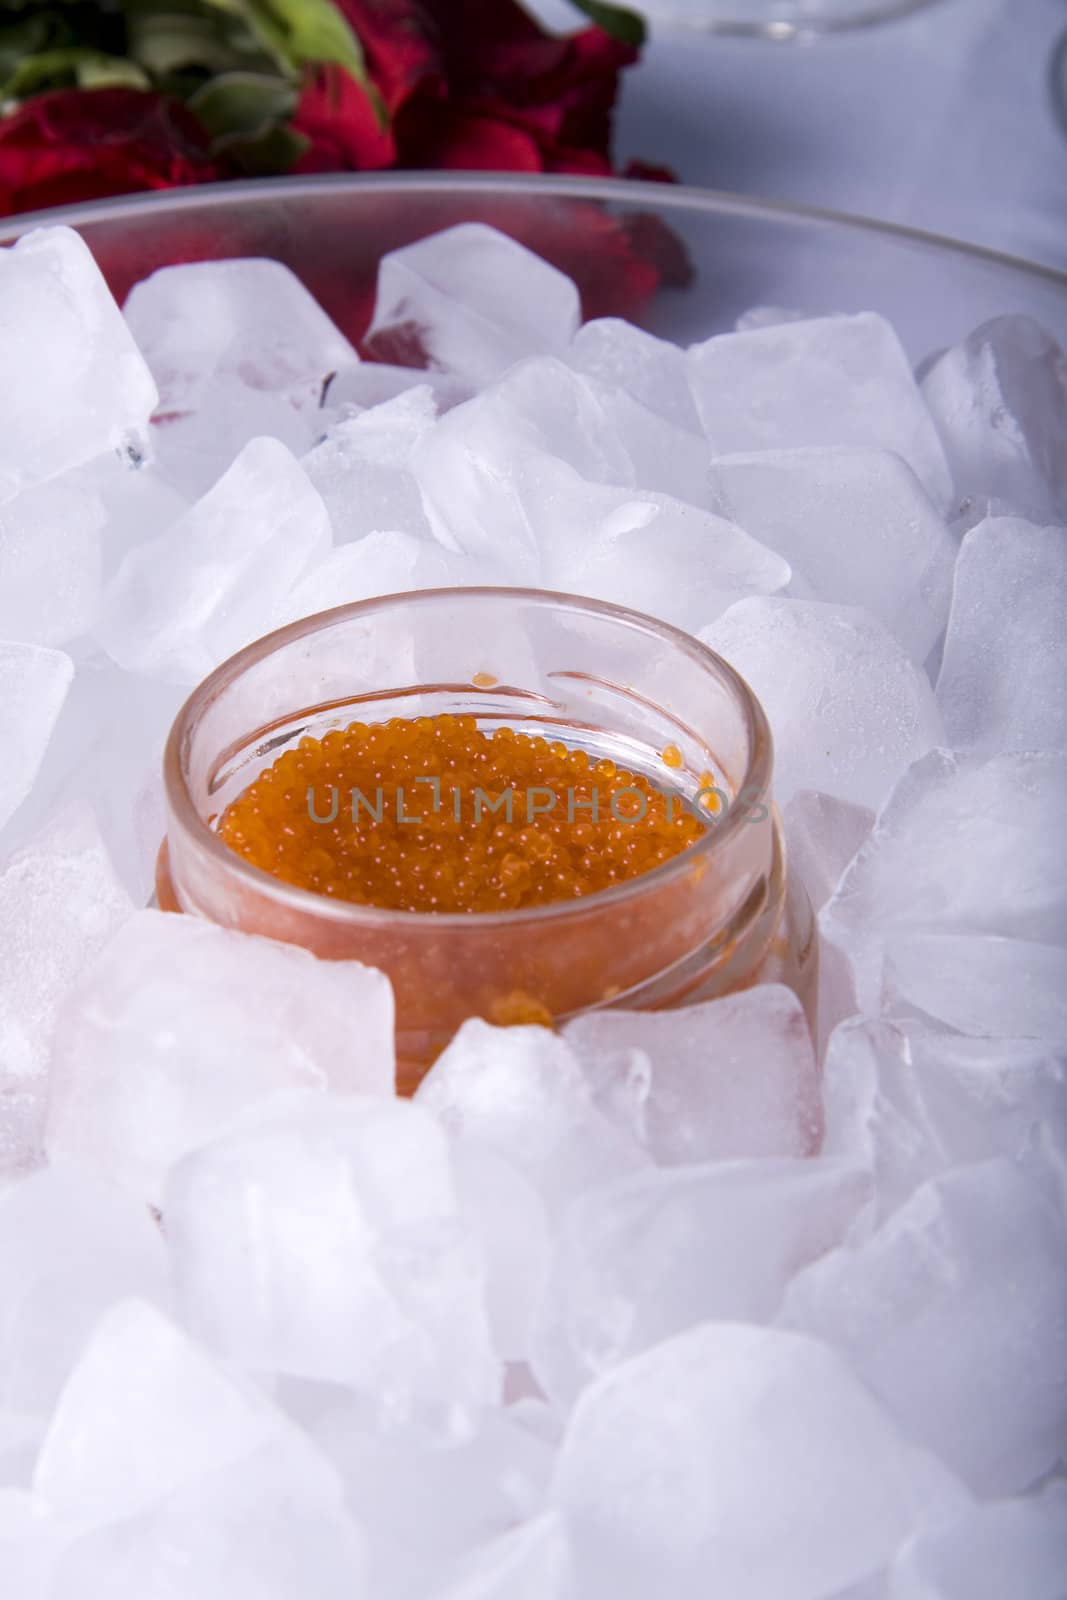 Red caviar in a glass jar surrounded by ice cubes and a rose